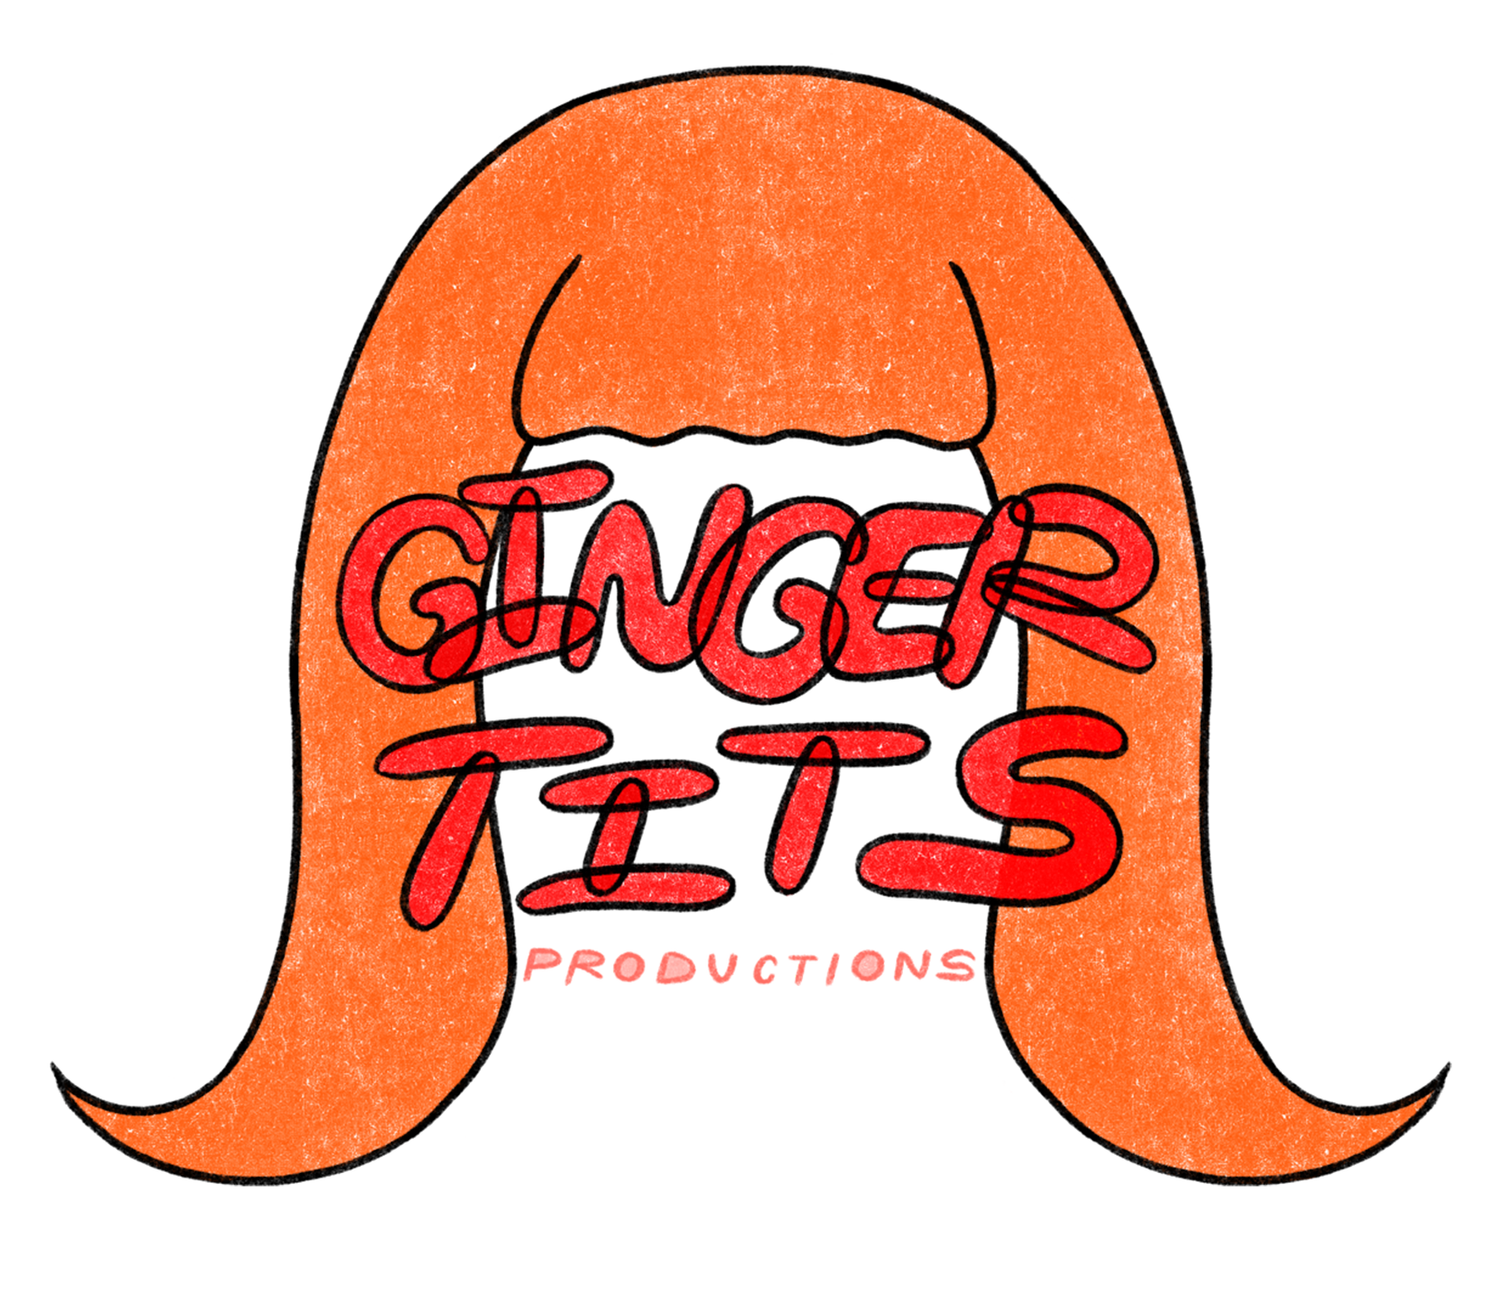 ginger tits productions